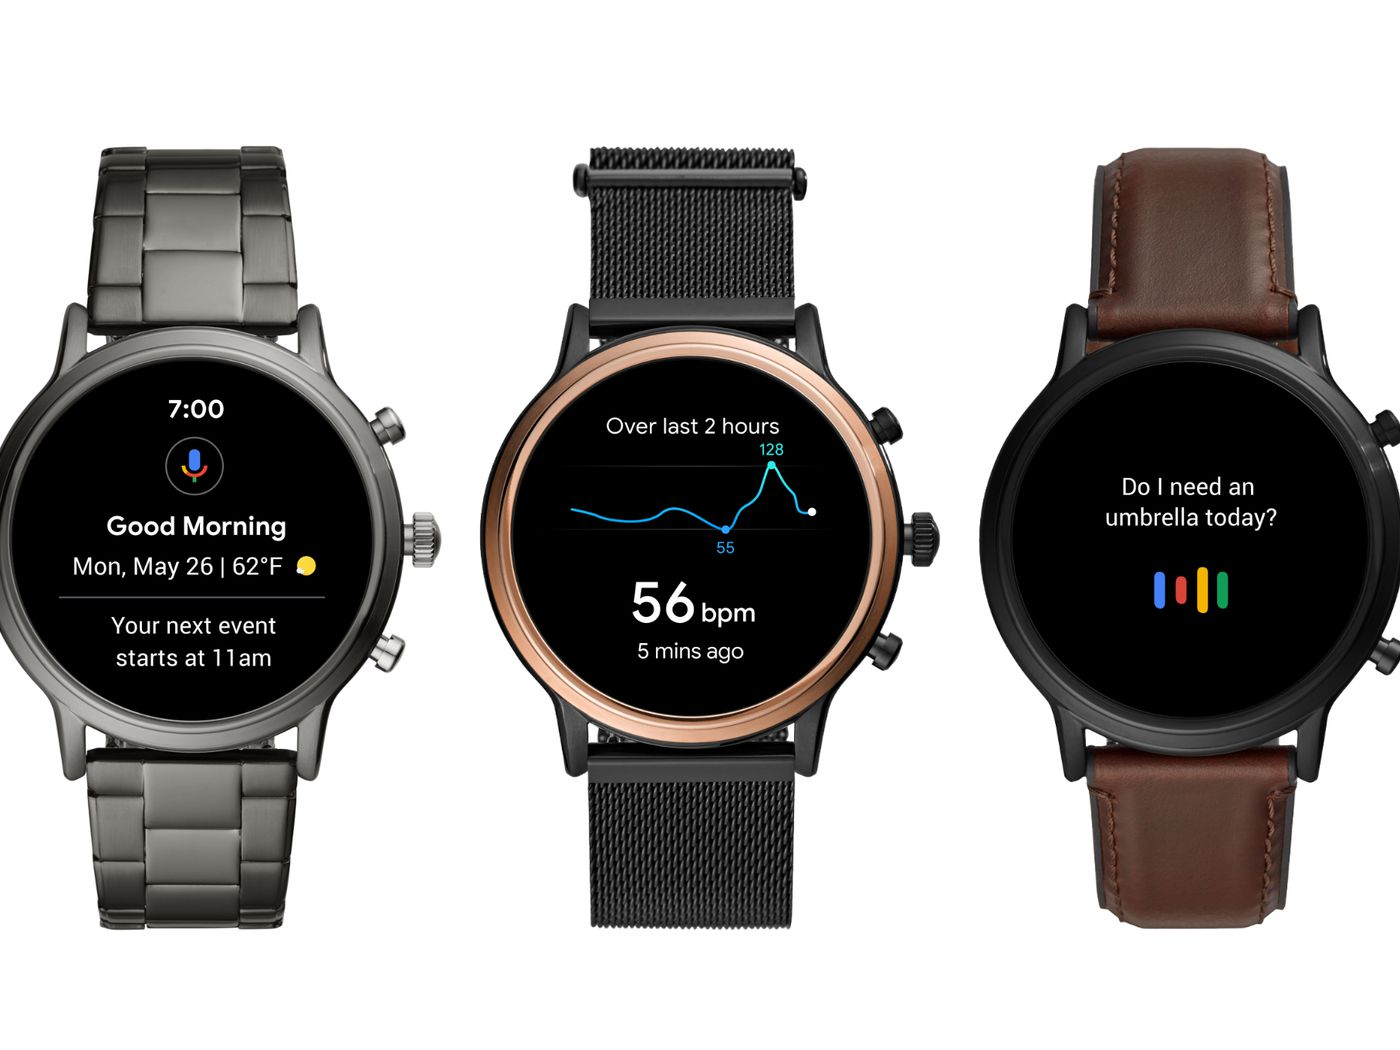 Fossil Gen 5 Wear OS Smartwatch launched with Snapdragon Wear 3100 platform